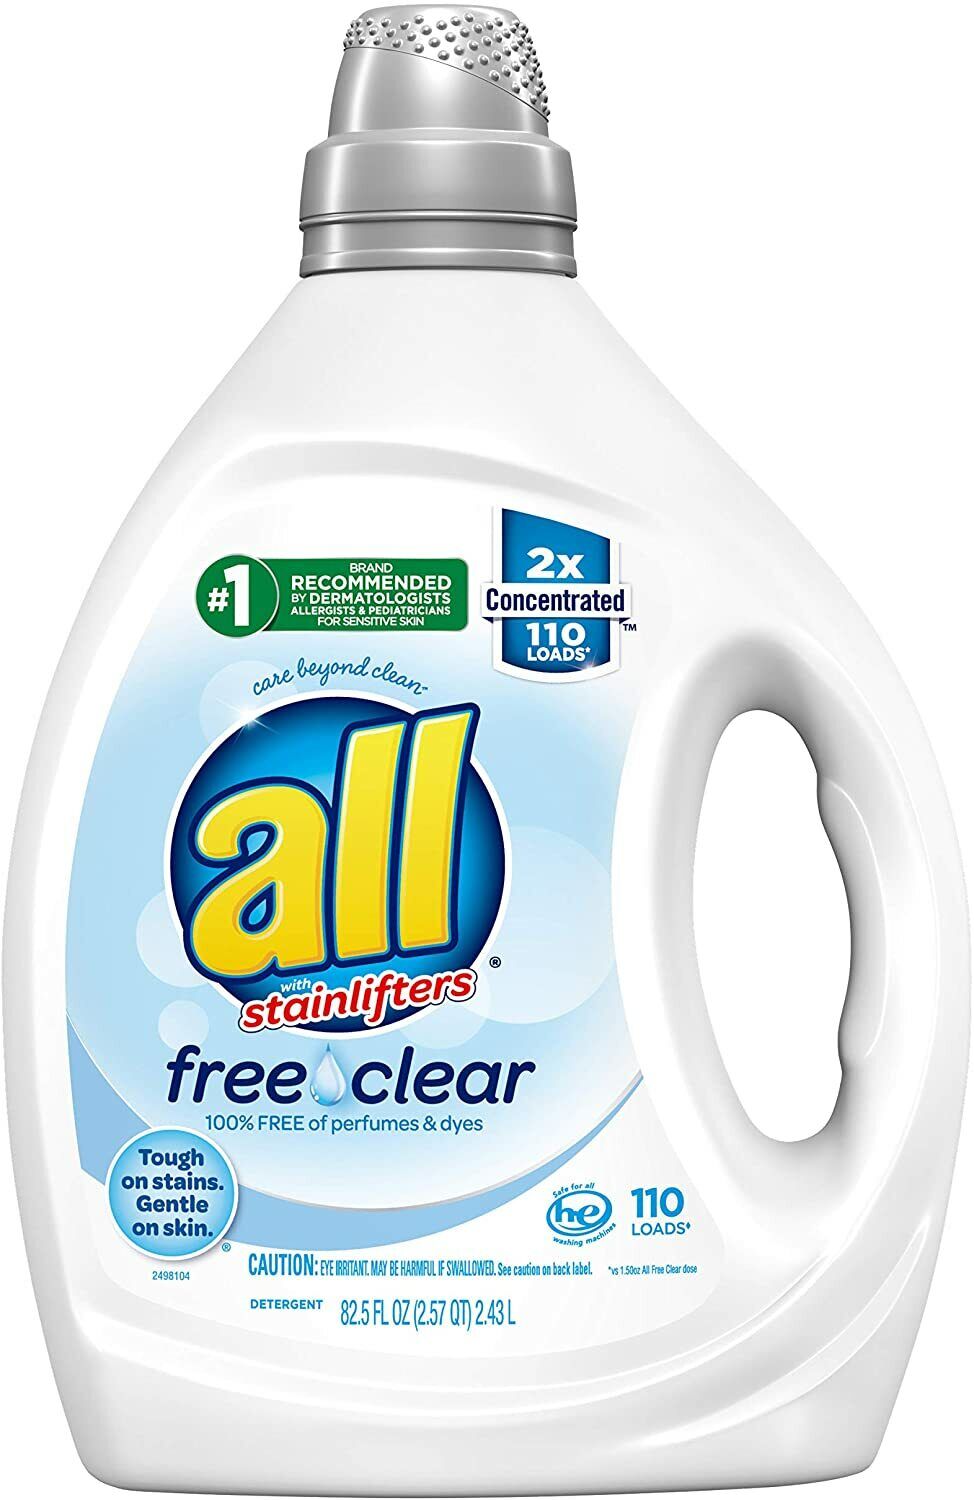 All Laundry Detergent, Free Clear Sensitive Skin, 2X Concentrated 110 Loads ️️